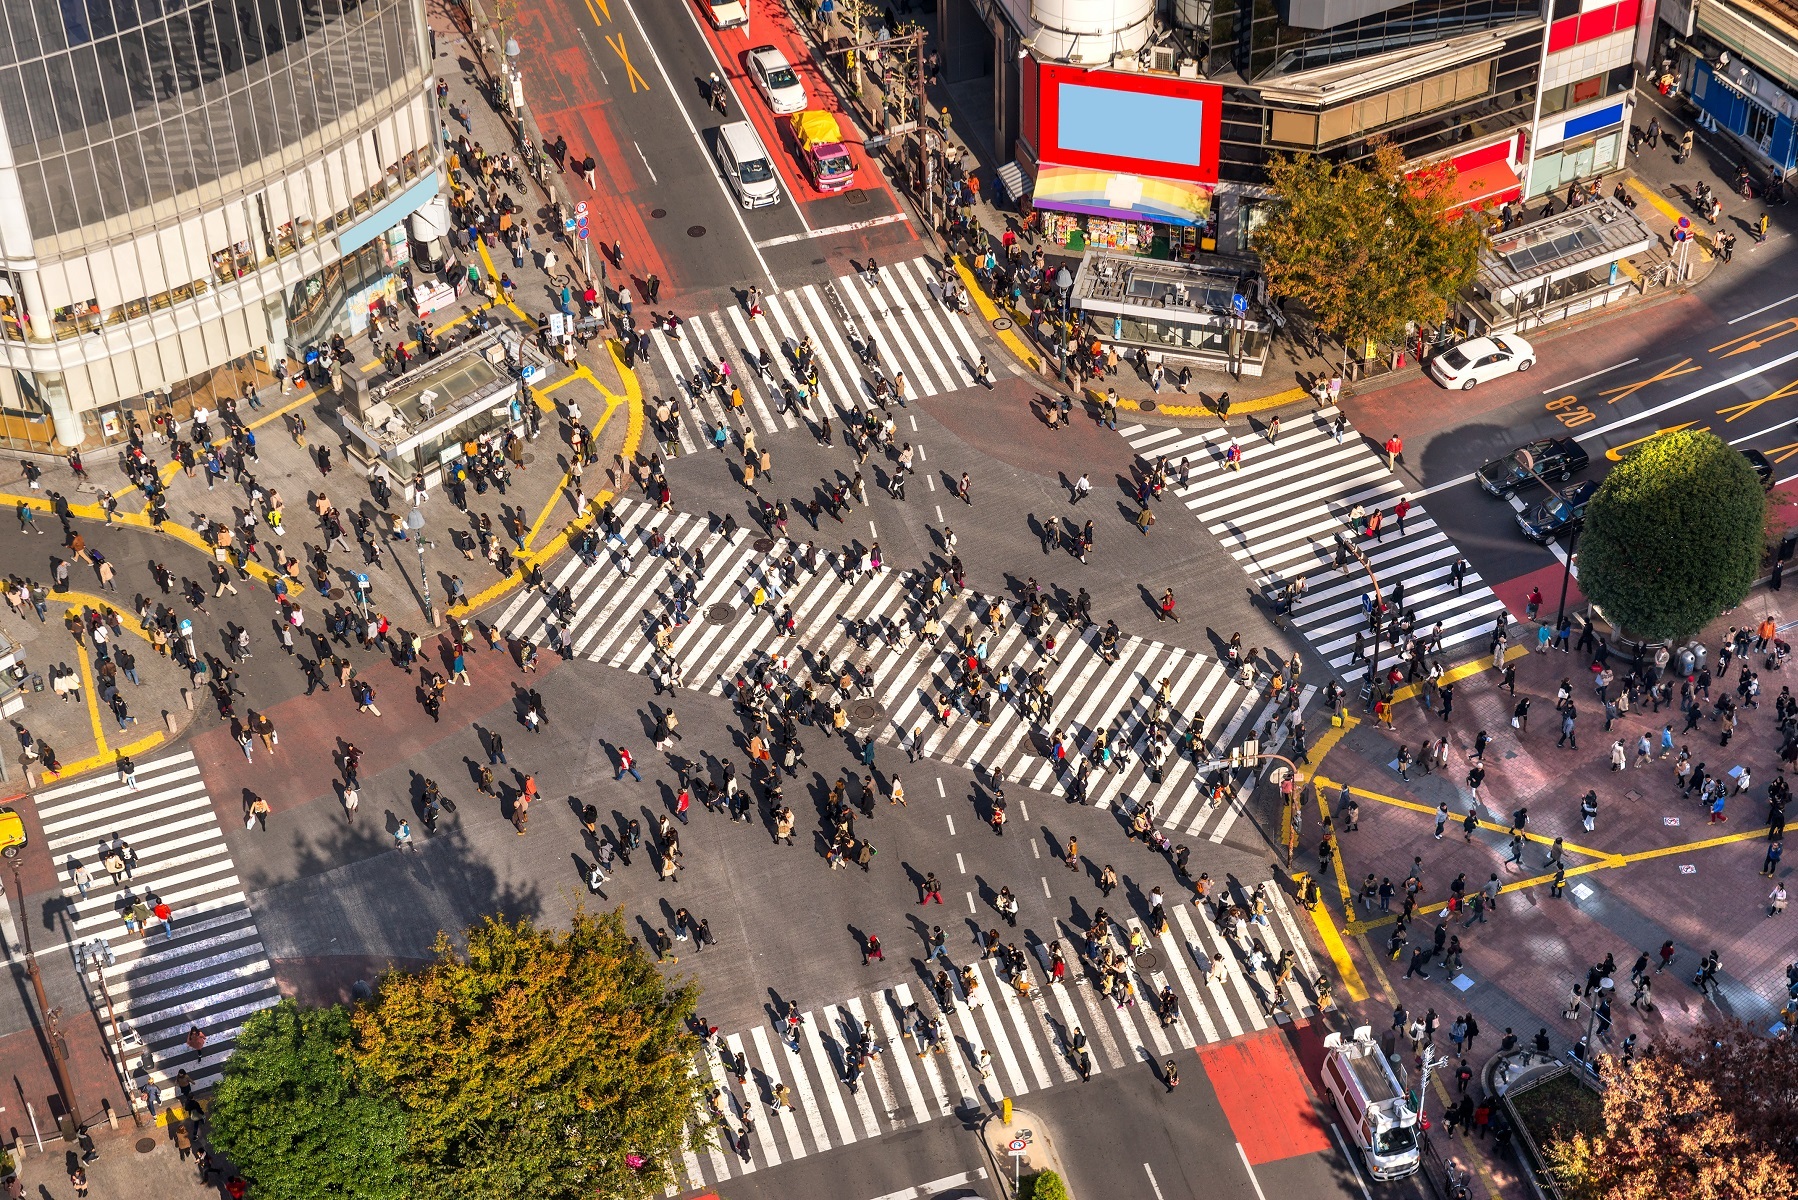 <p>If any site captures the hectic energy of city life in Japan, it is <a href="https://en.japantravel.com/tokyo/shibuya-crossing/3016">Shibuya Crossing</a>. The fast-paced scramble intersection outside Tokyo’s Shibuya station is crossed by an estimated <a href="https://www.jrailpass.com/blog/shibuya-crossing">2.4 million people</a> every day. </p><p>Held up as a symbol of modern Japan and an equivalent to New York’s Times Square and London’s Piccadilly Circus, Shibuya Crossing has featured in numerous films, such as <em>Lost In Translation </em>and <em>The Fast and the Furious: Tokyo Drift. </em></p>